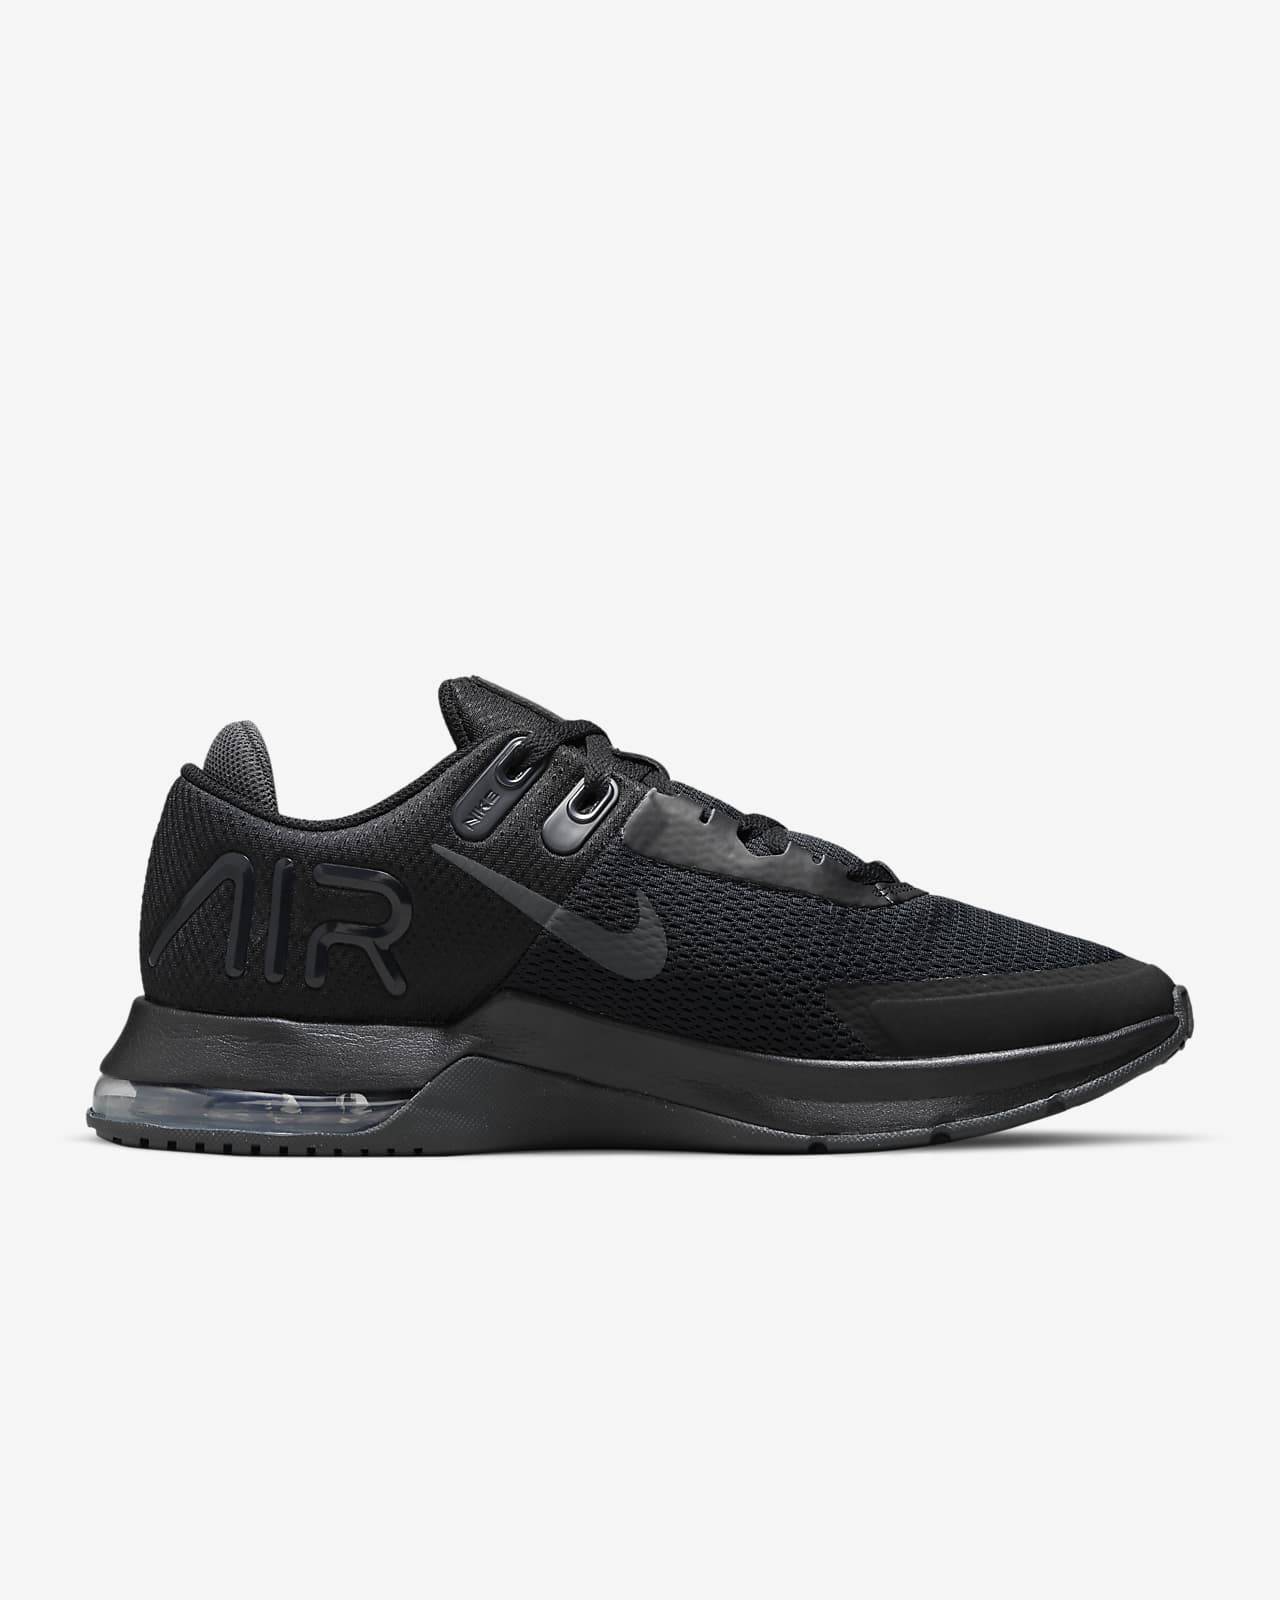 Nike Air Max Alpha Trainer 4 Men's Training Shoes